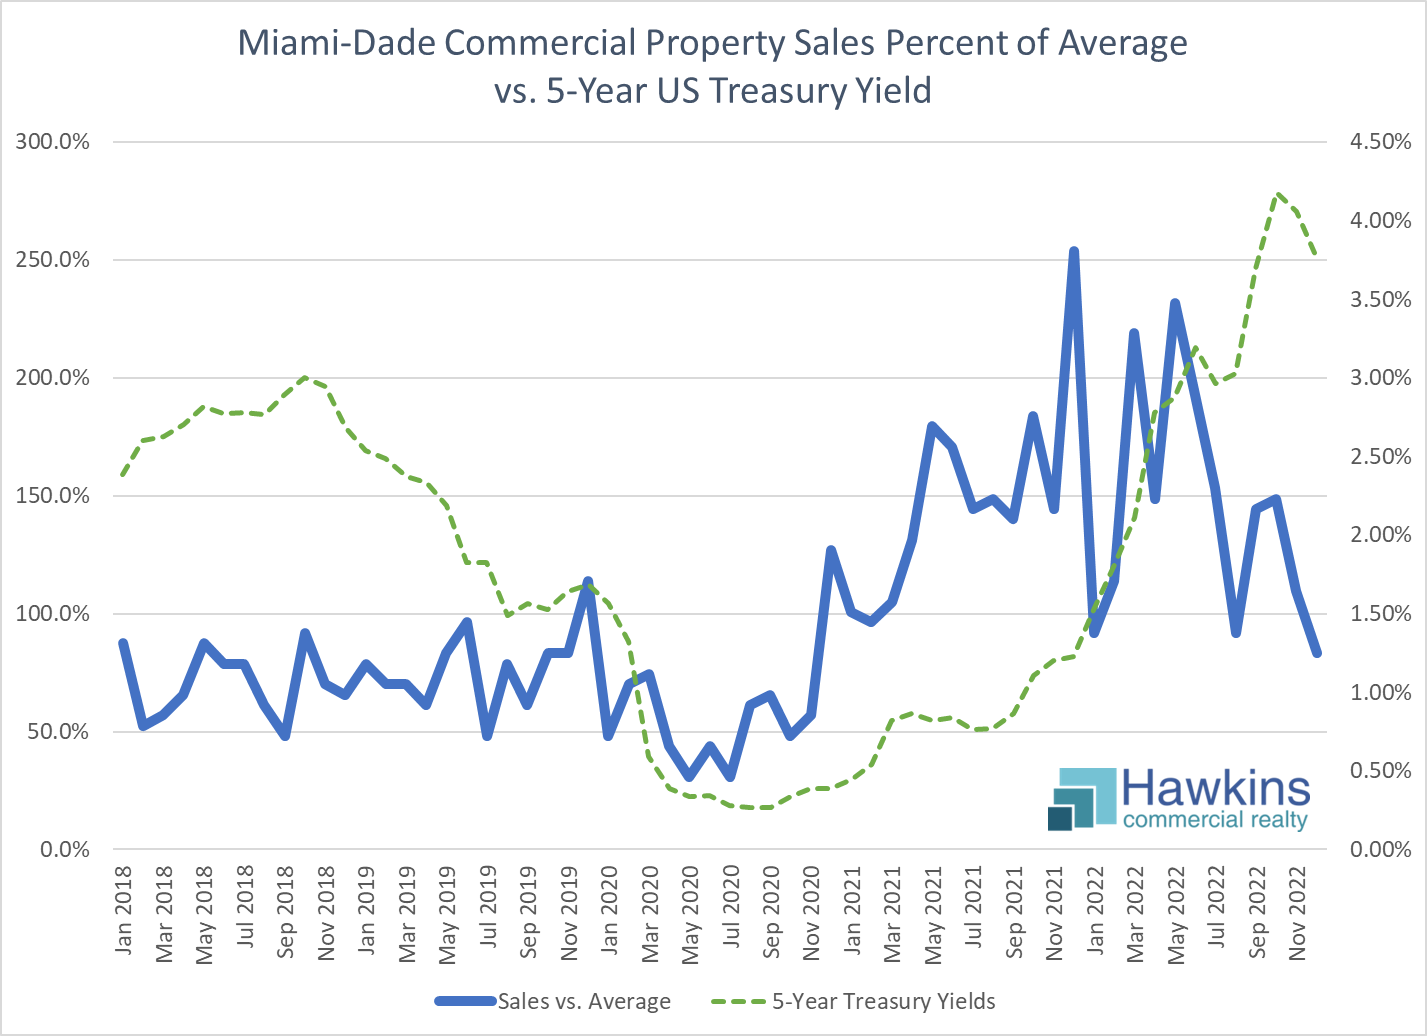 Miami-Dade Commercial Property Sales Percent of Average vs. 5-Year US Treasury Yield: January 2018 to December 2022 Commercial MLS Miami Association of Realtors, Property Types Land-Commercial/Business/Agricultural/Industrial, Commercial/Industrial, within Miami-Dade County, Price $1,000,000+, Calculated from 1,371 Listings, Retrieved 1/10/23 | Board of Governors of the Federal Reserve System (US), Market Yield on U.S. Treasury Securities at 5-Year Constant Maturity, Quoted on an Investment Basis [DGS5], retrieved from FRED, Federal Reserve Bank of St. Louis, January 9, 2023.